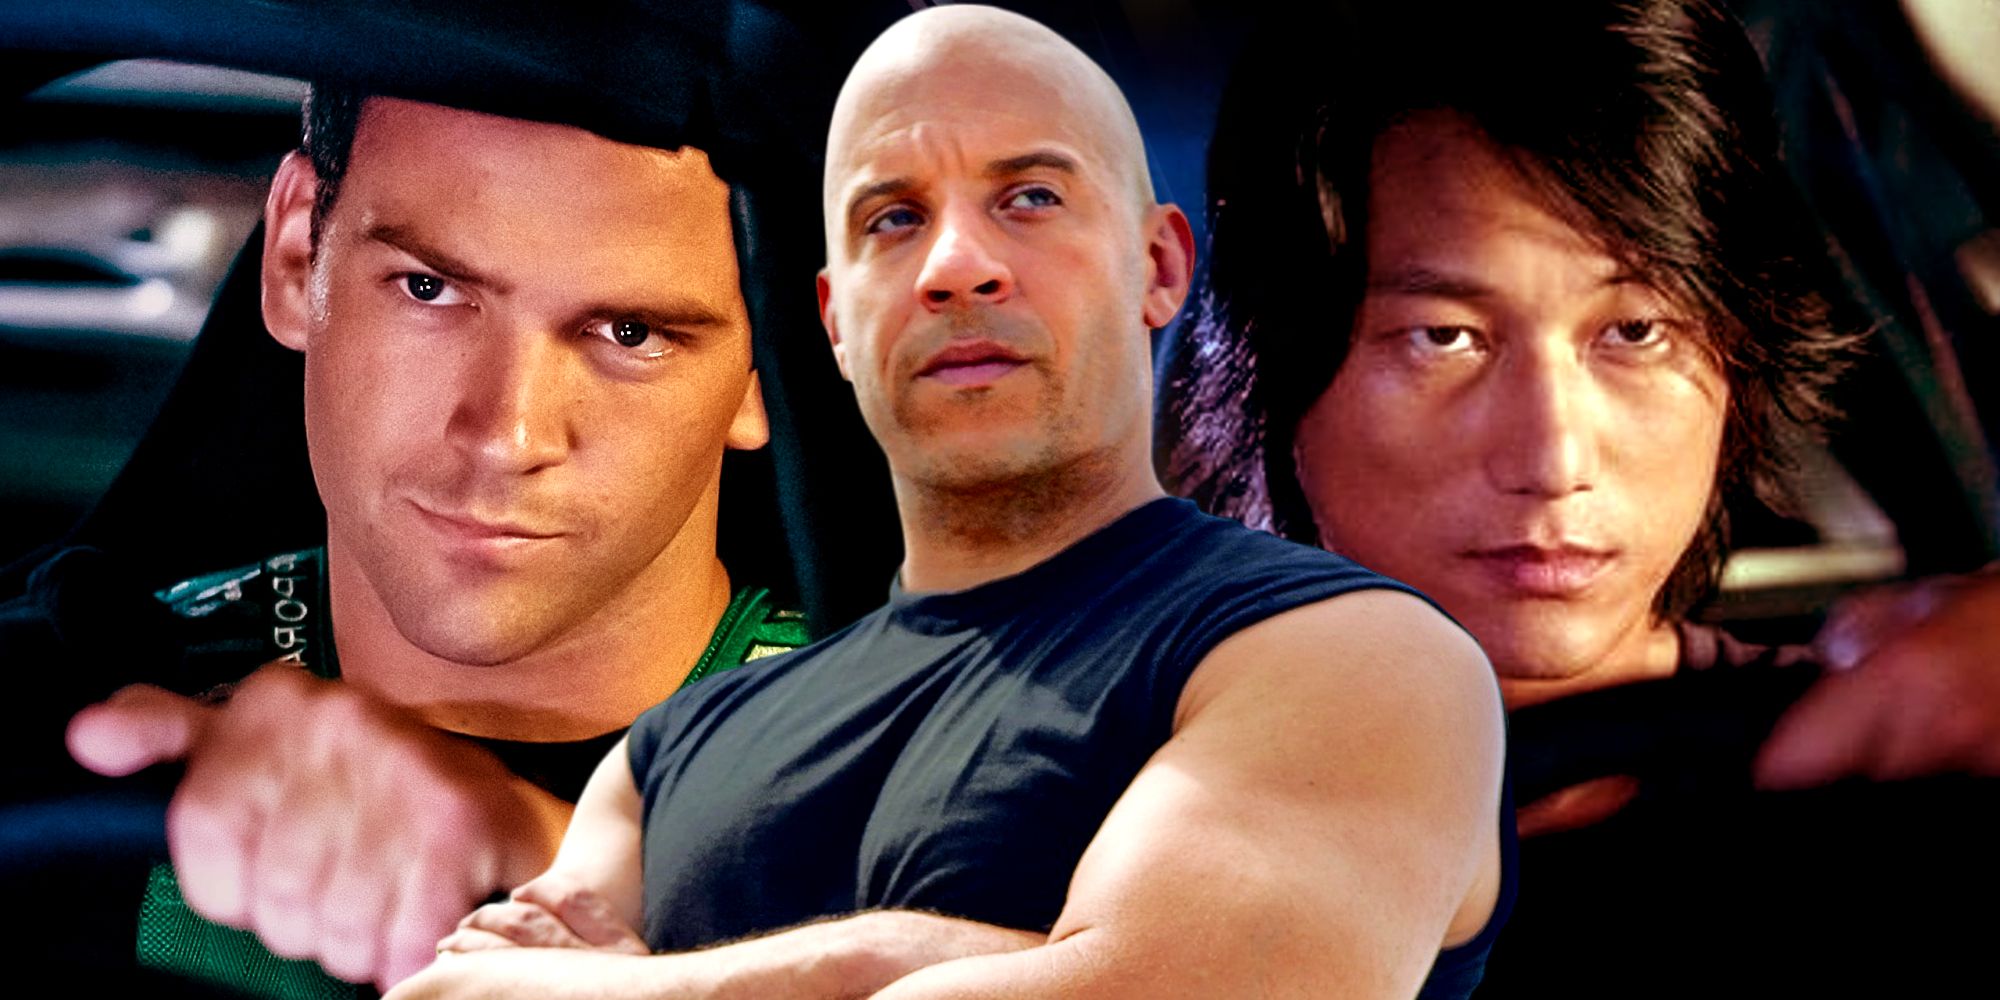 Vin Diesel as Dominic Toretto and the Fast and Furious Tokyo Drift's Luke and Han